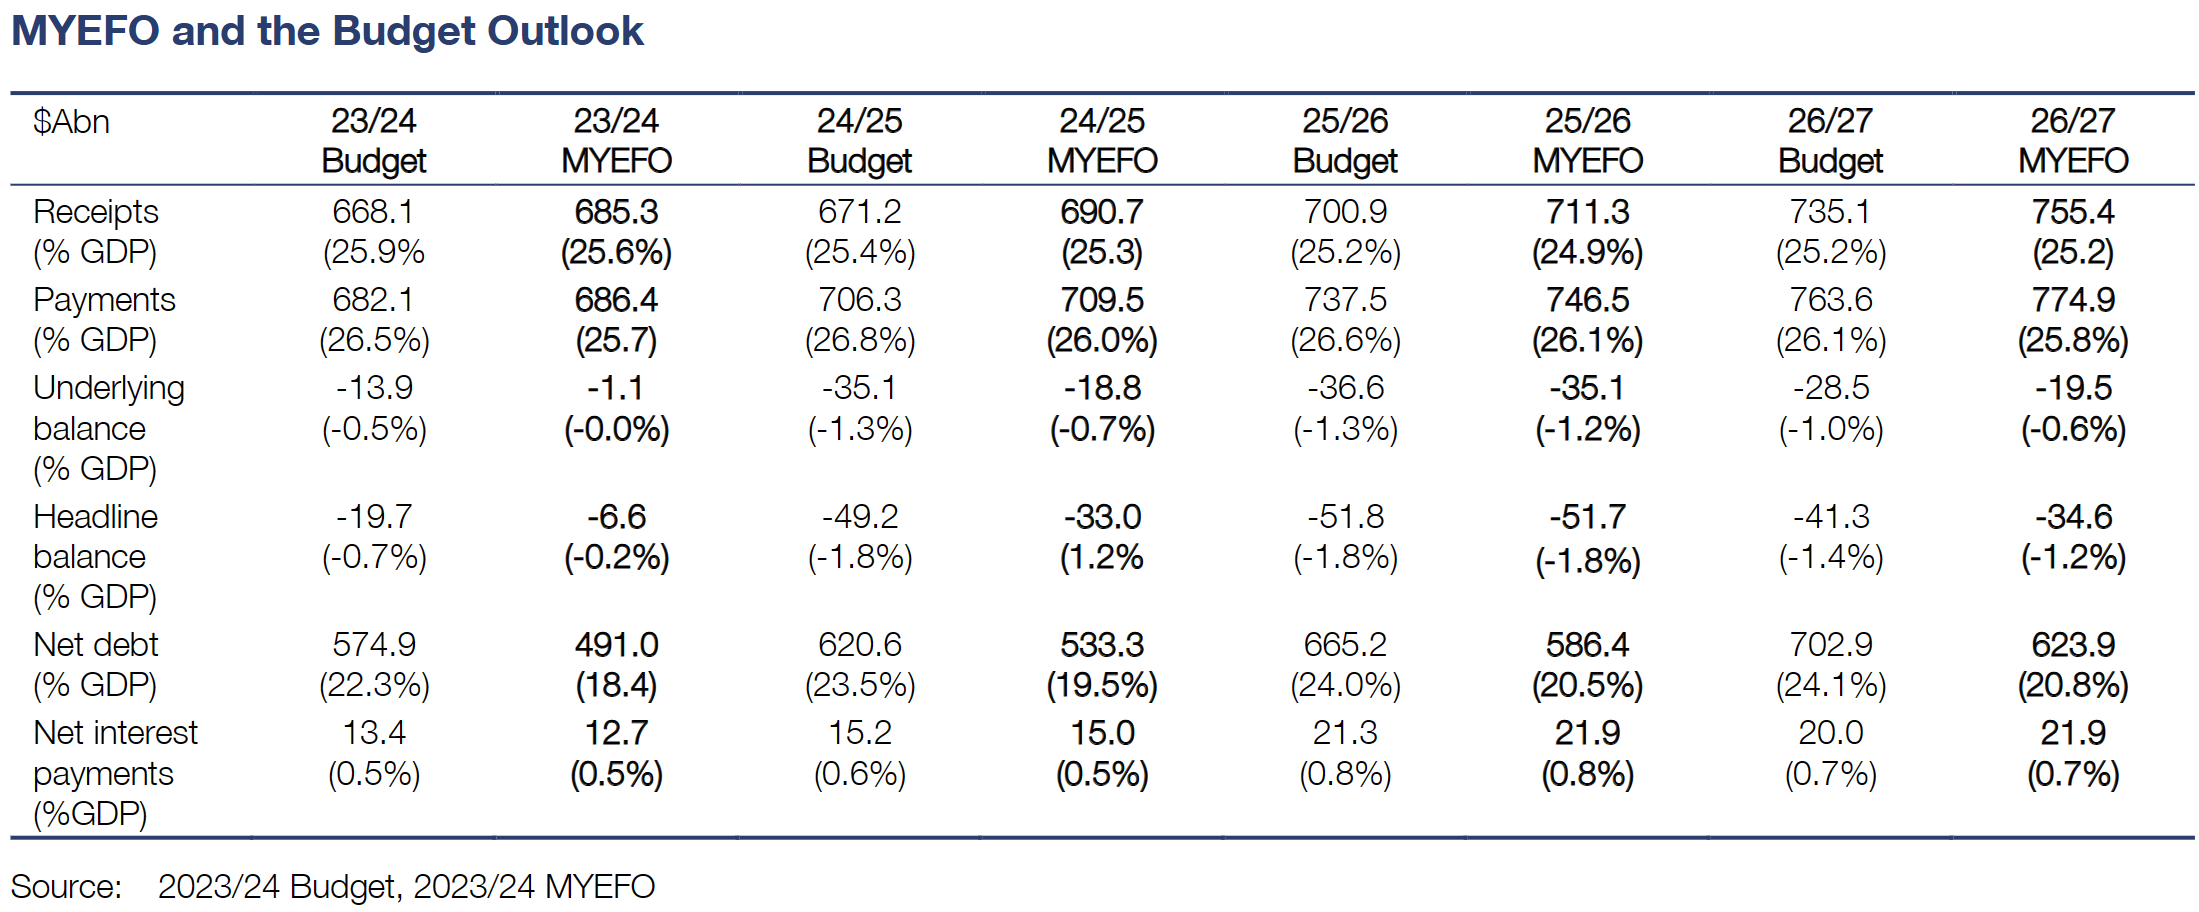 MYEFO and Budget Outlook